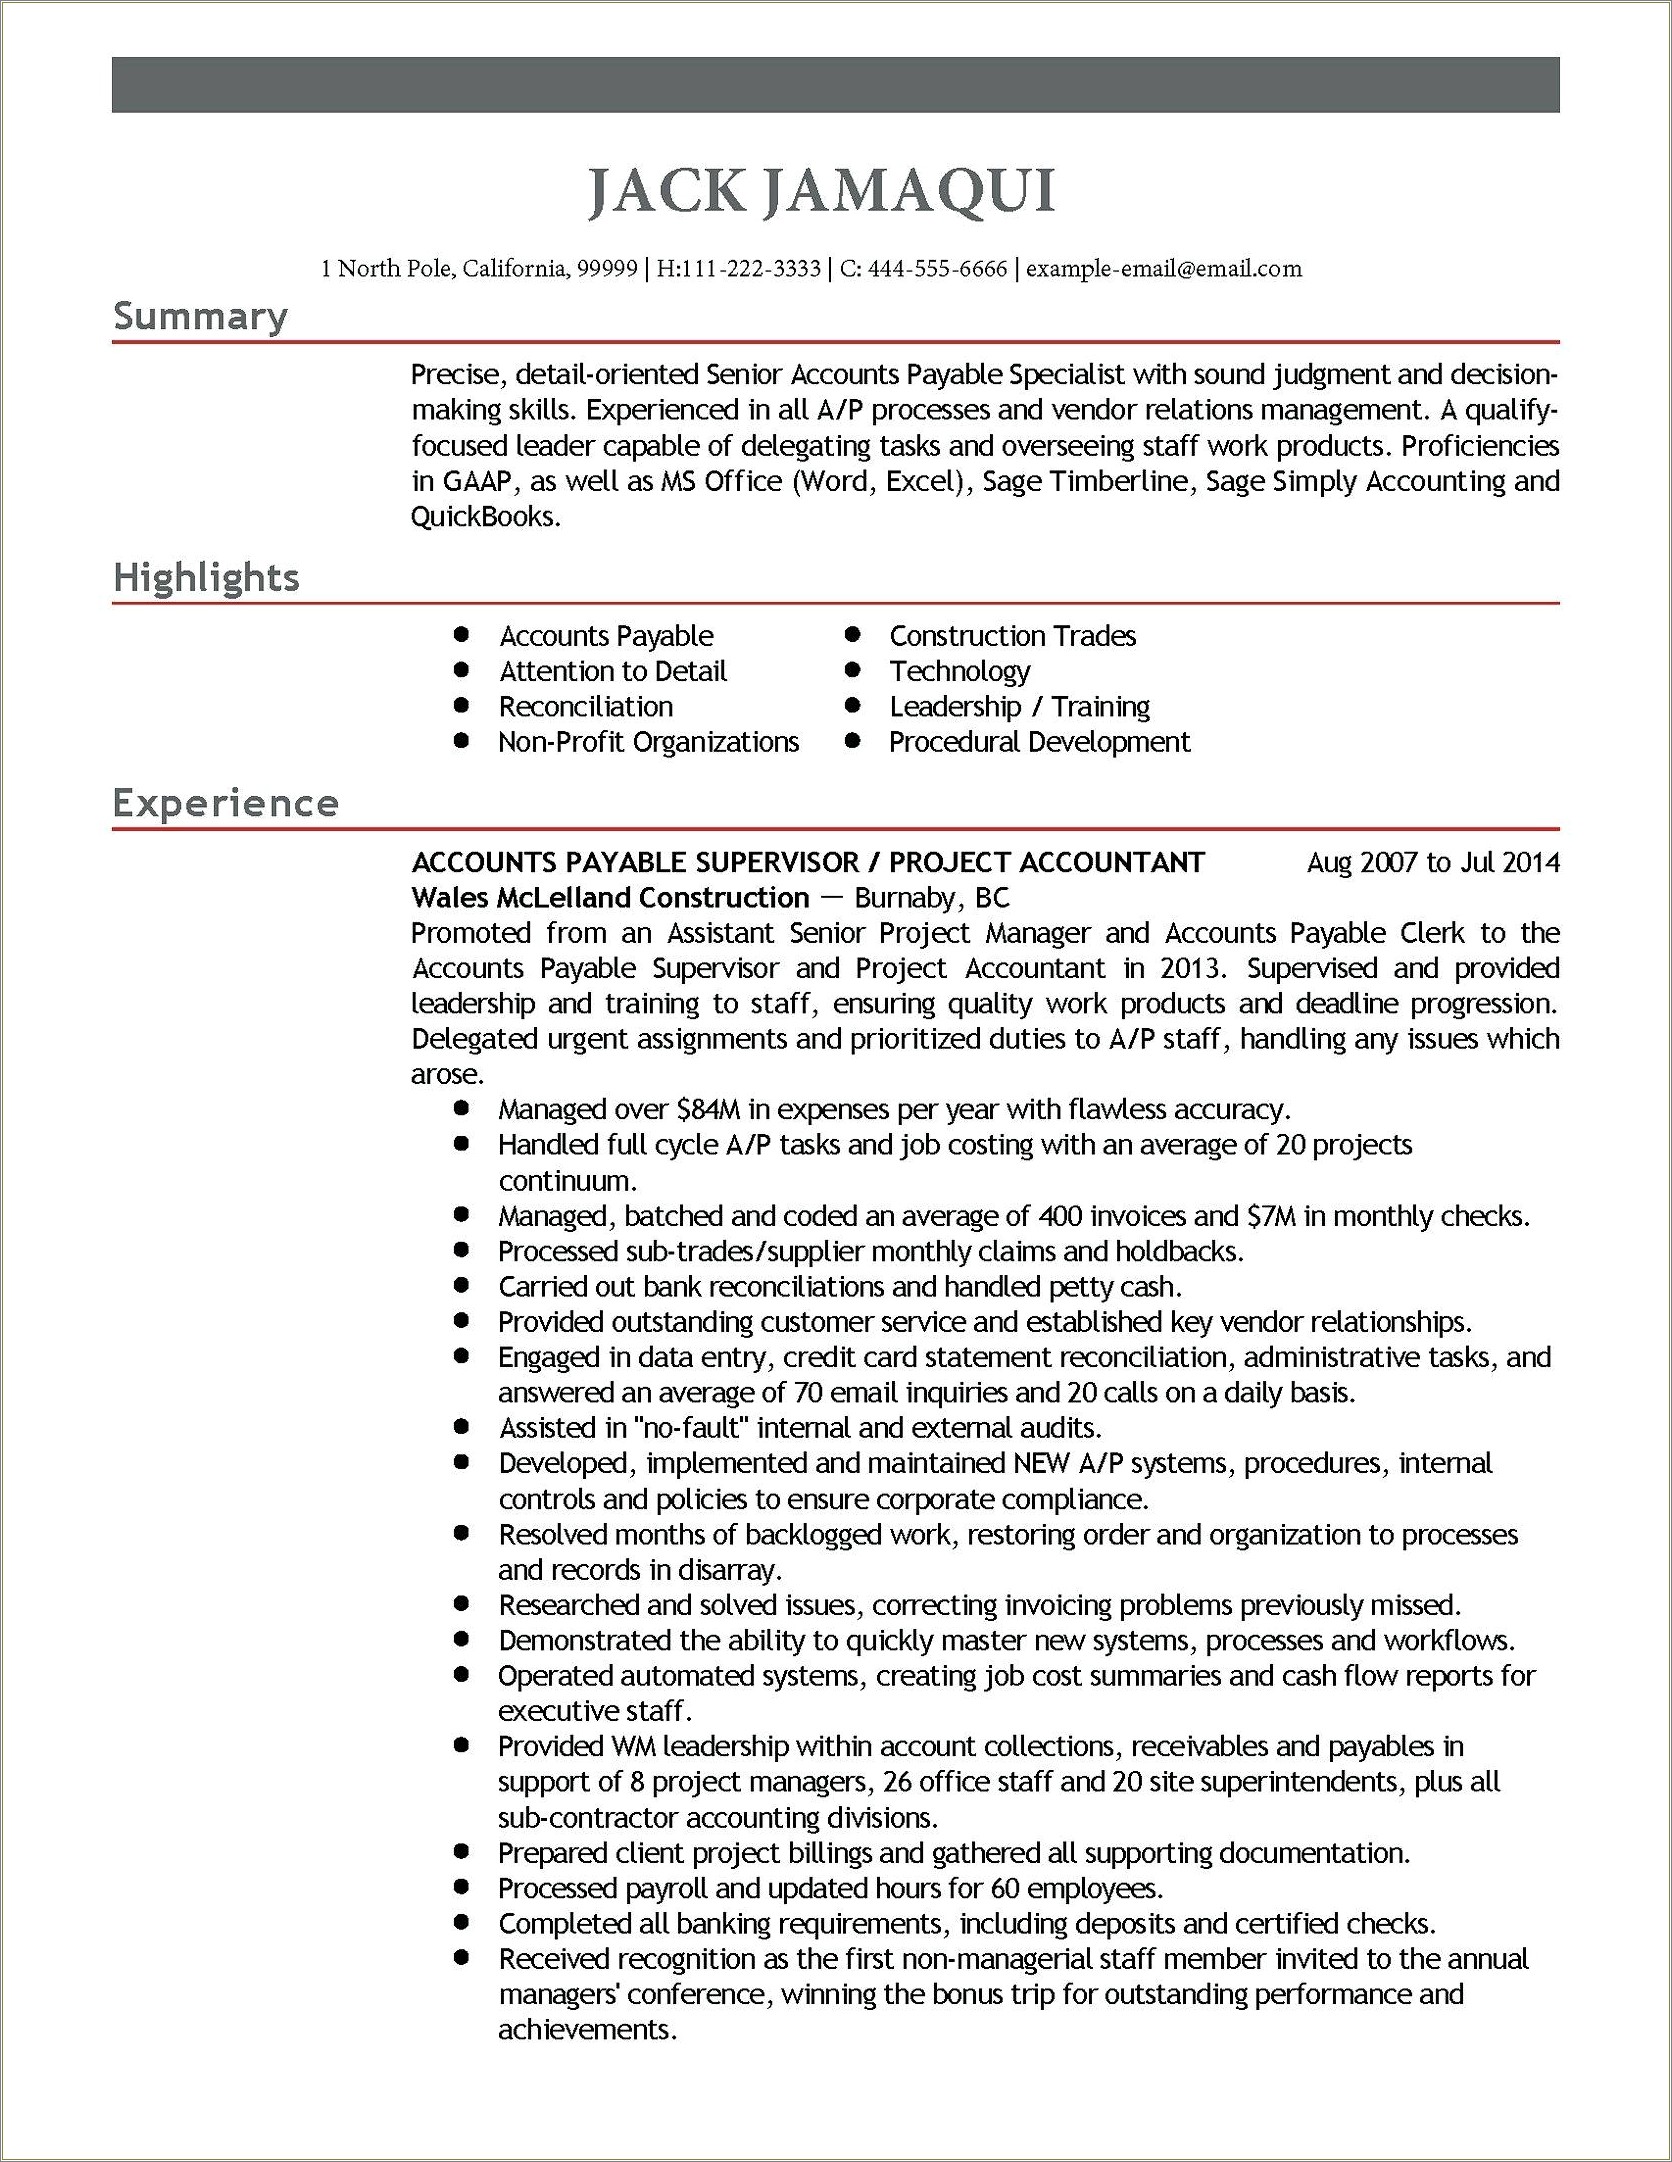 Resume For Accounts Payable Assistant Manager